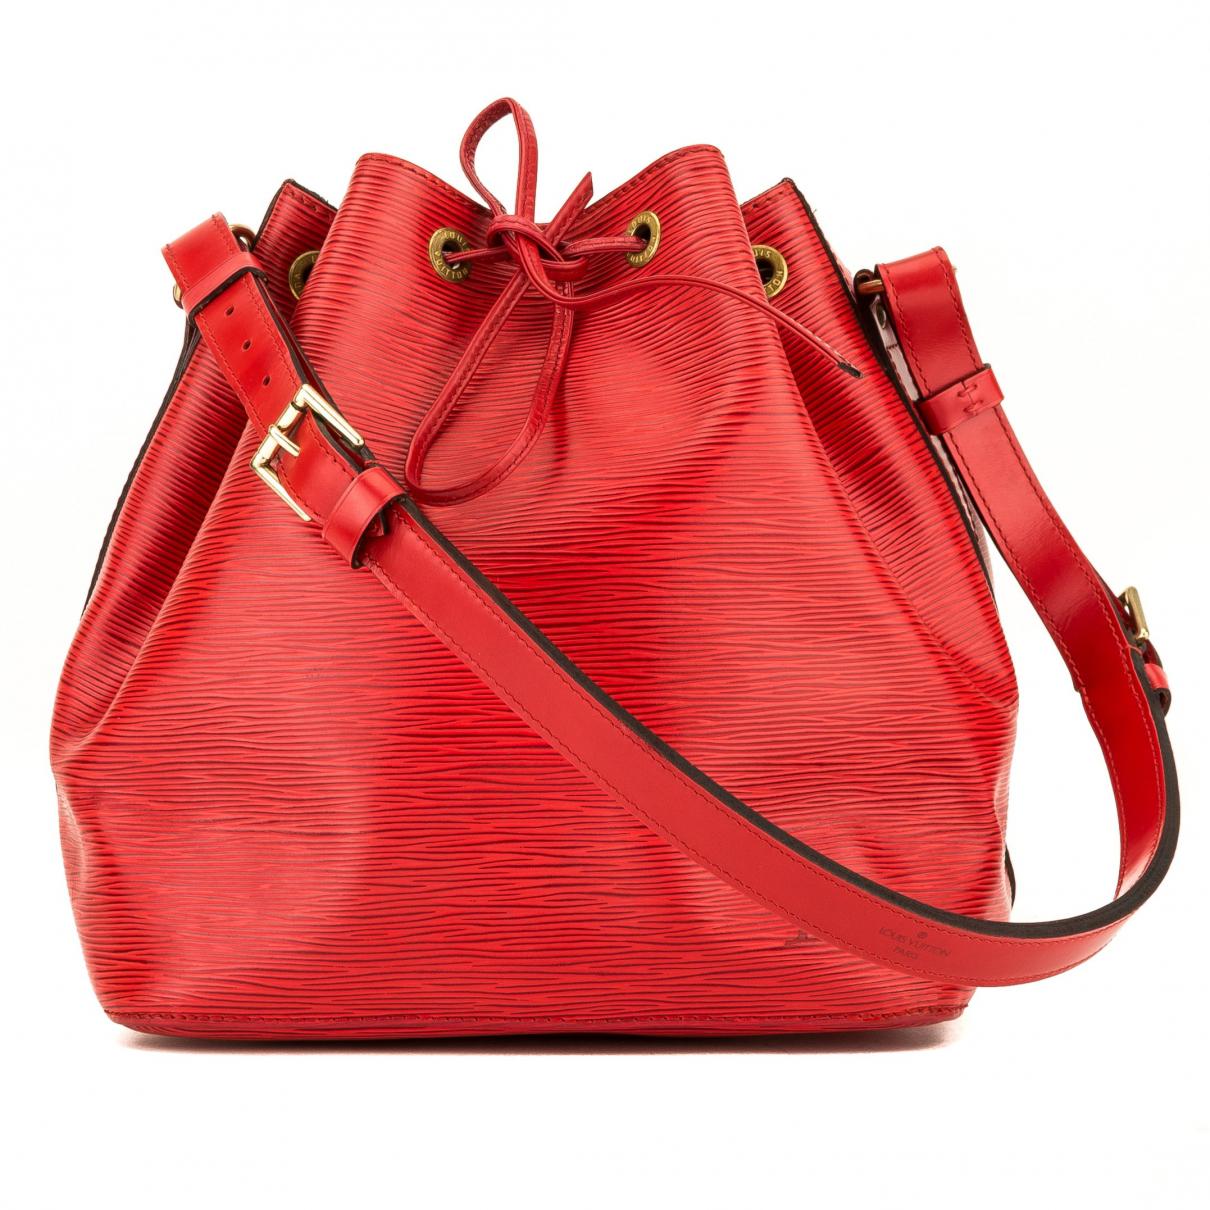 Lyst - Louis Vuitton Vintage Noé Red Leather Handbag in Red